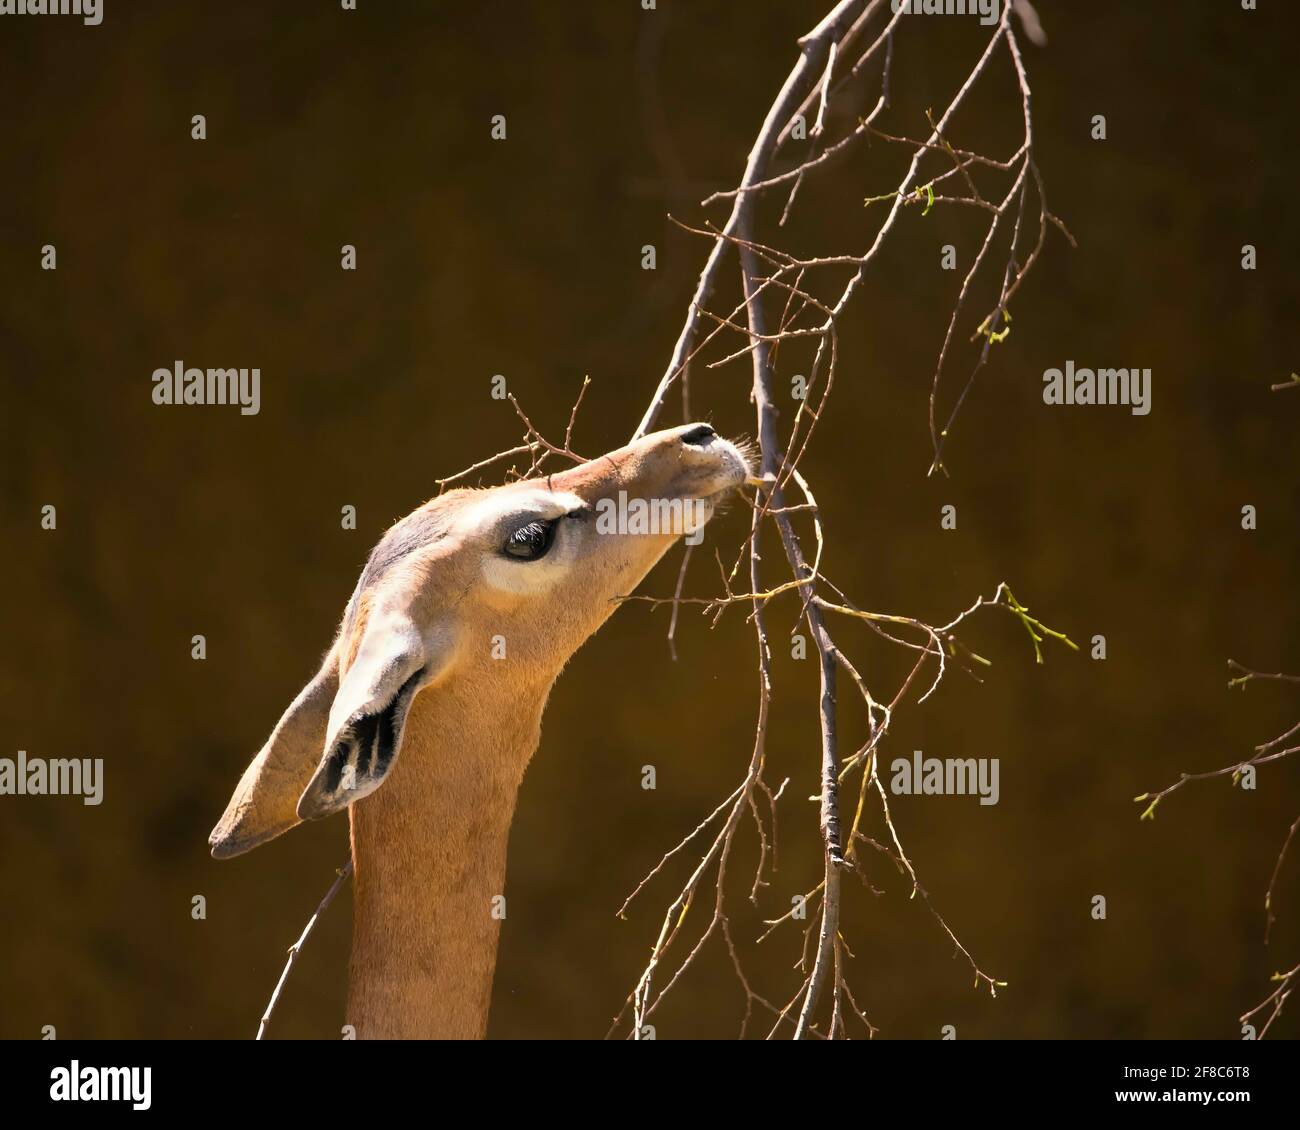 Los Angeles, CA, USA: March 31, 2021: A portrait of a Gerenuk as it feeds on leaves at the LA Zoo in Los Angeles, CA. Stock Photo